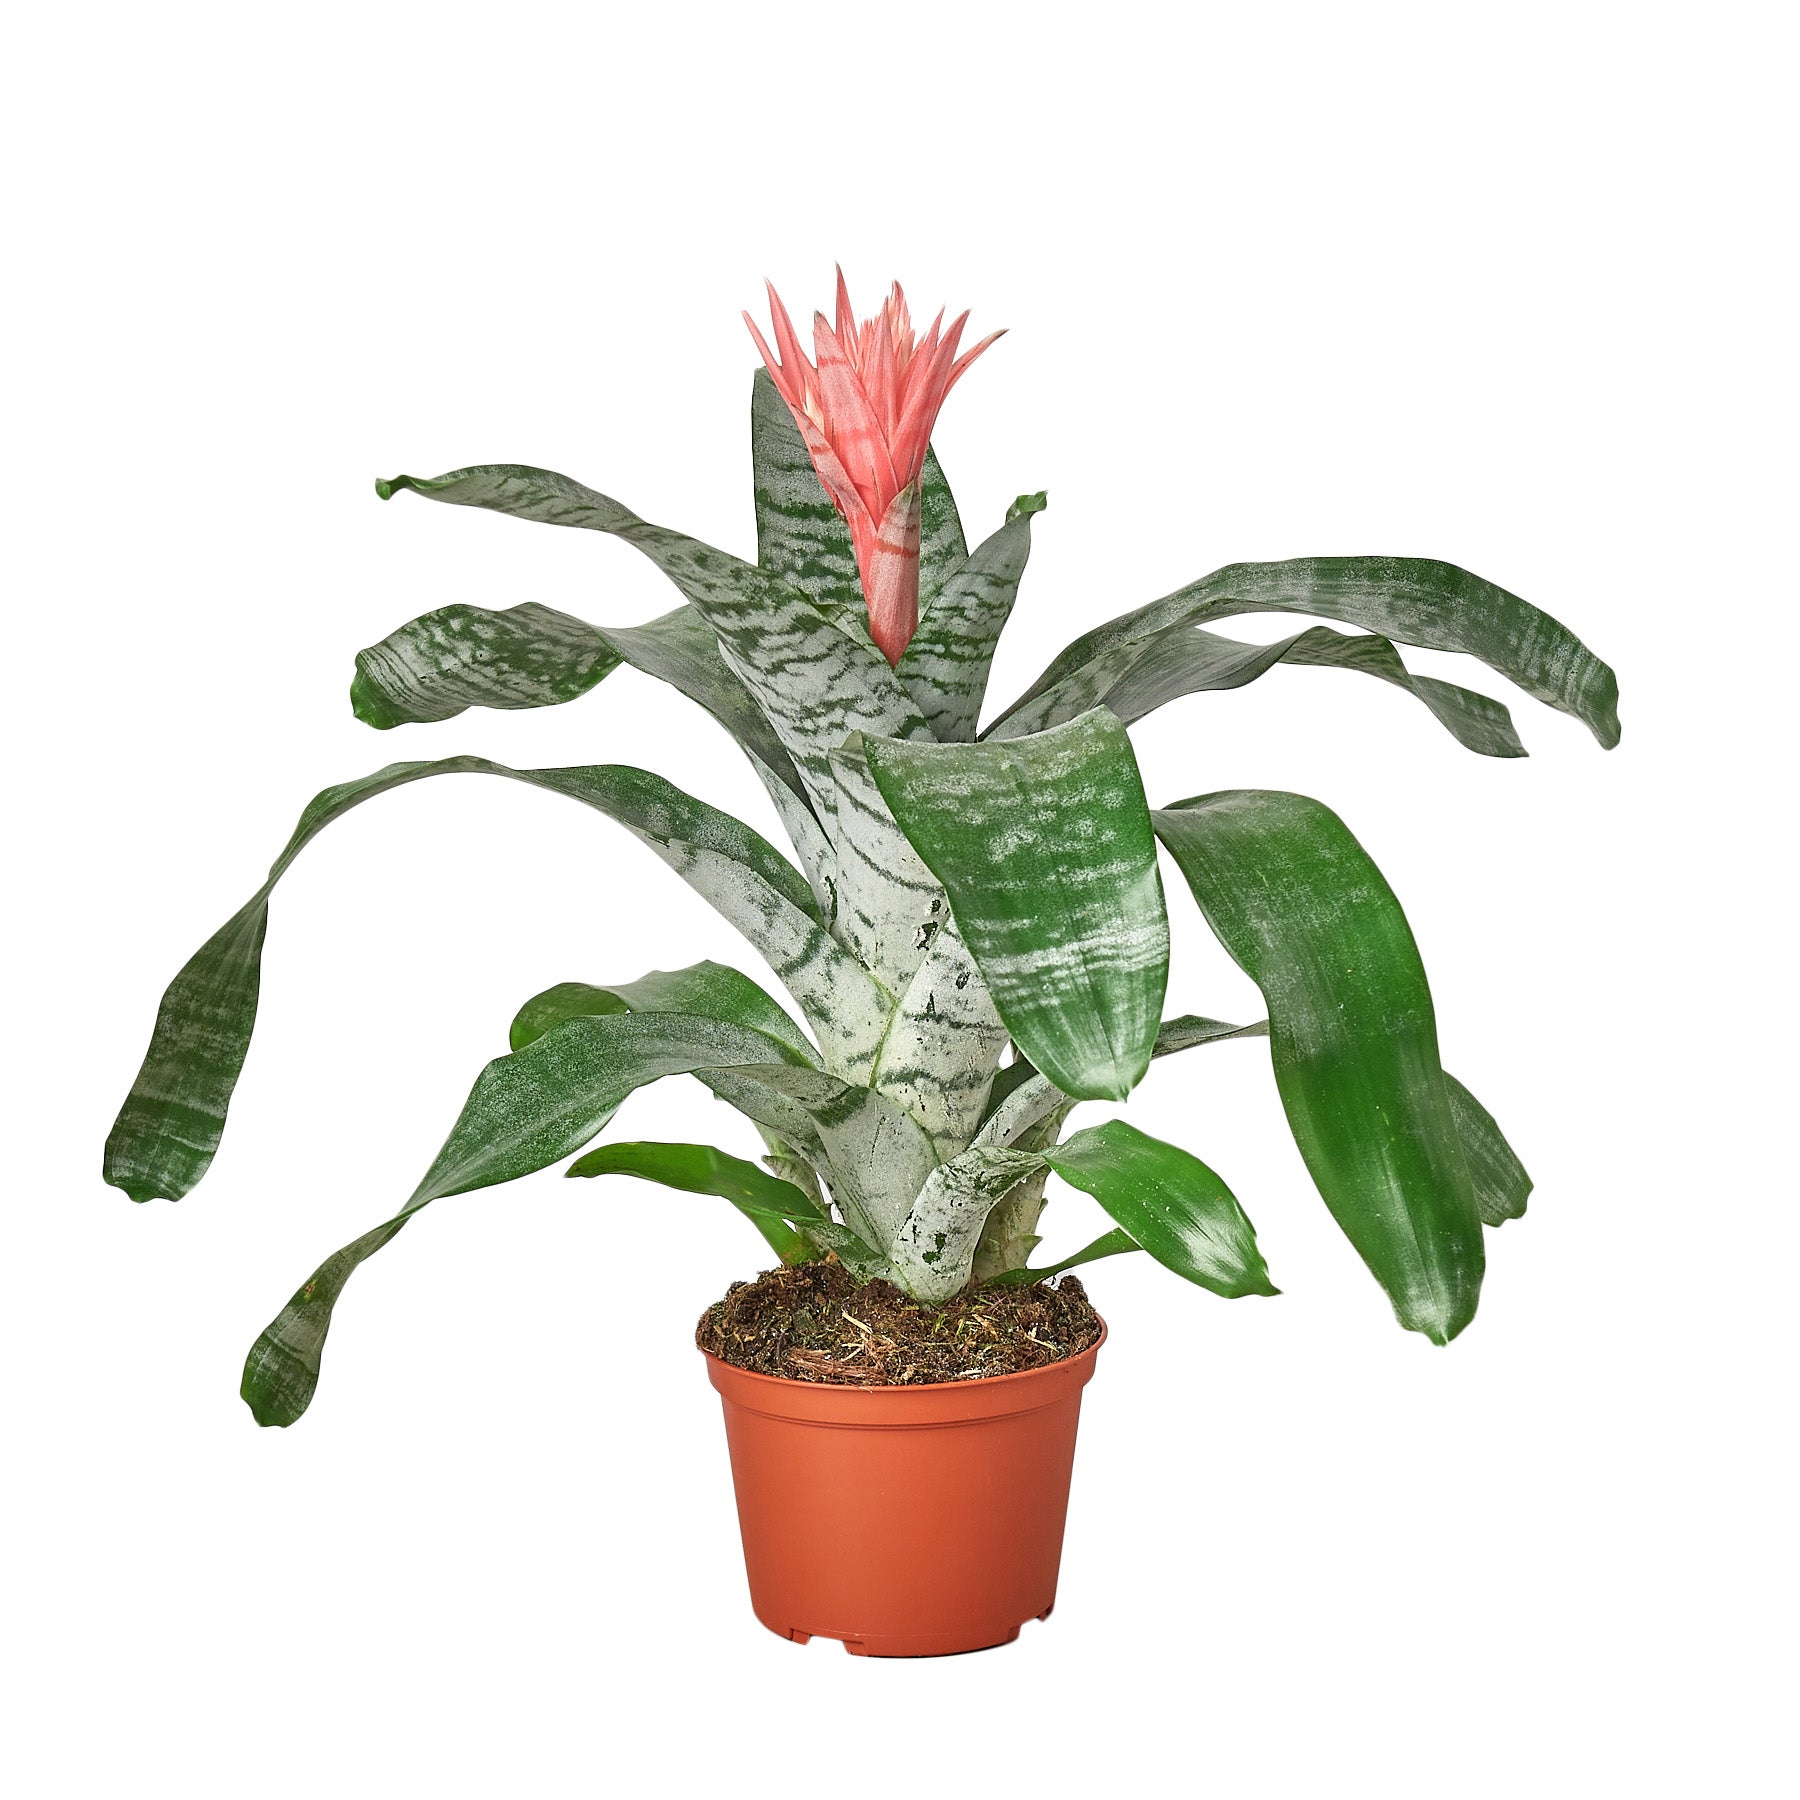 A plant in a pot on a white background, perfect for your best garden center near me.